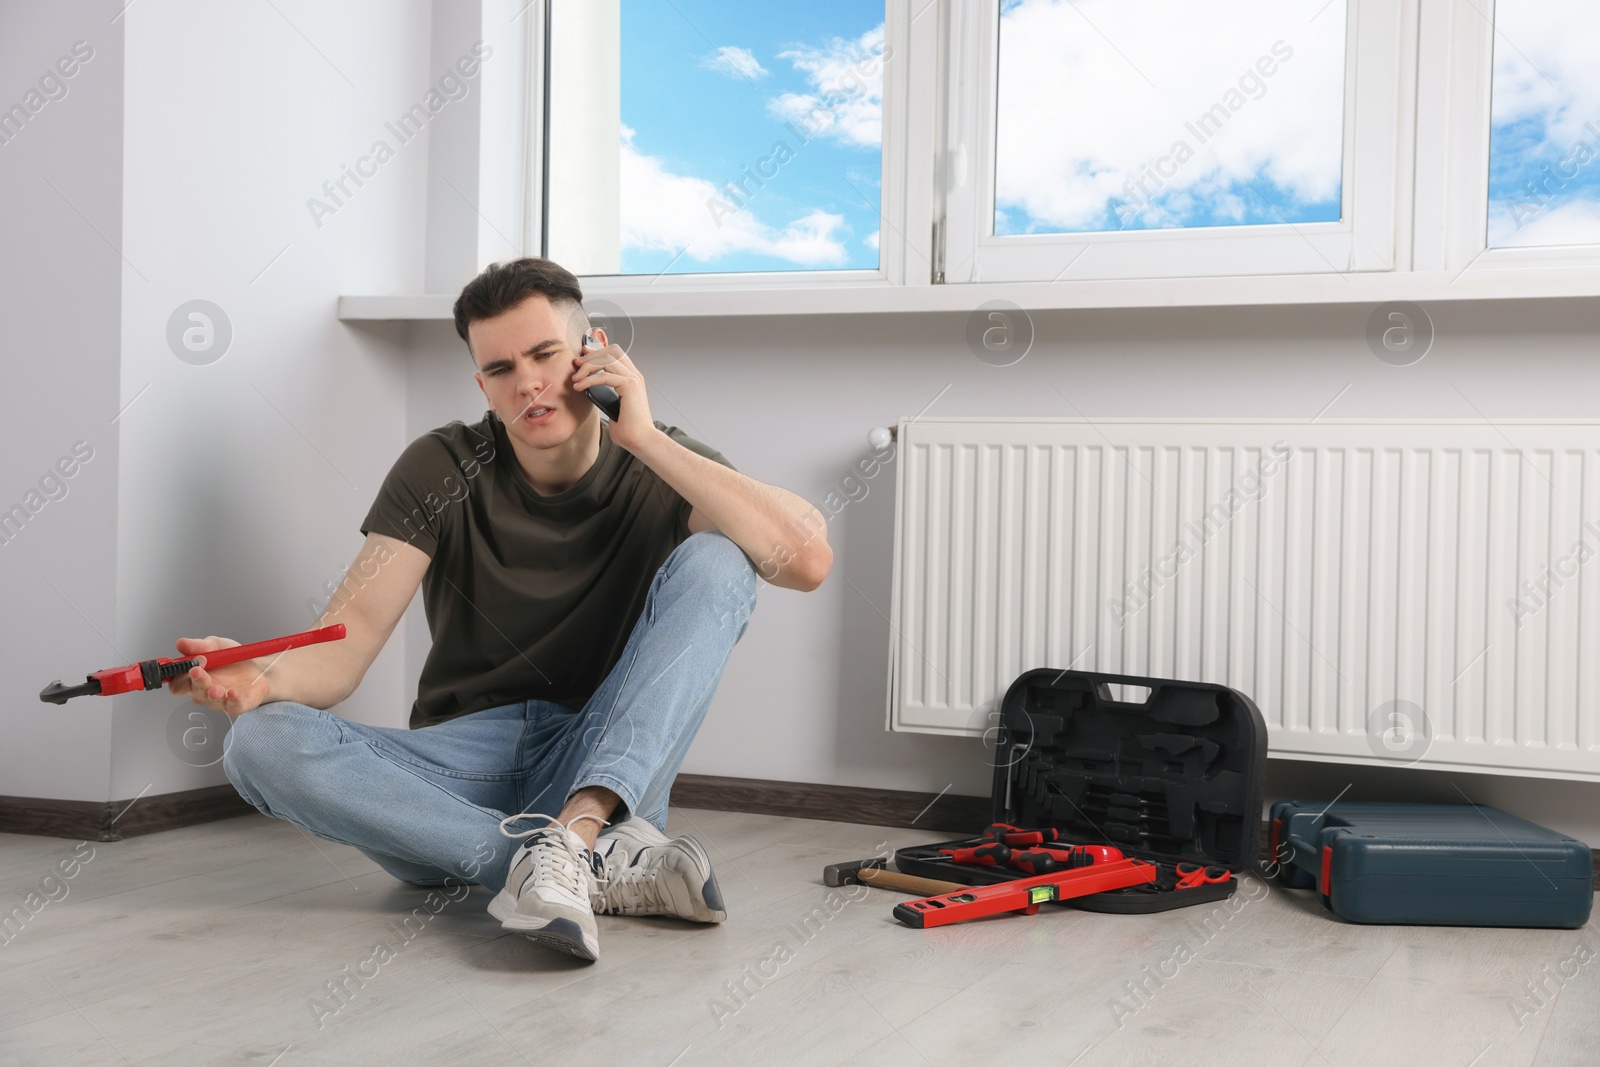 Photo of Handyman with pipe wrench talking on phone near radiator in room